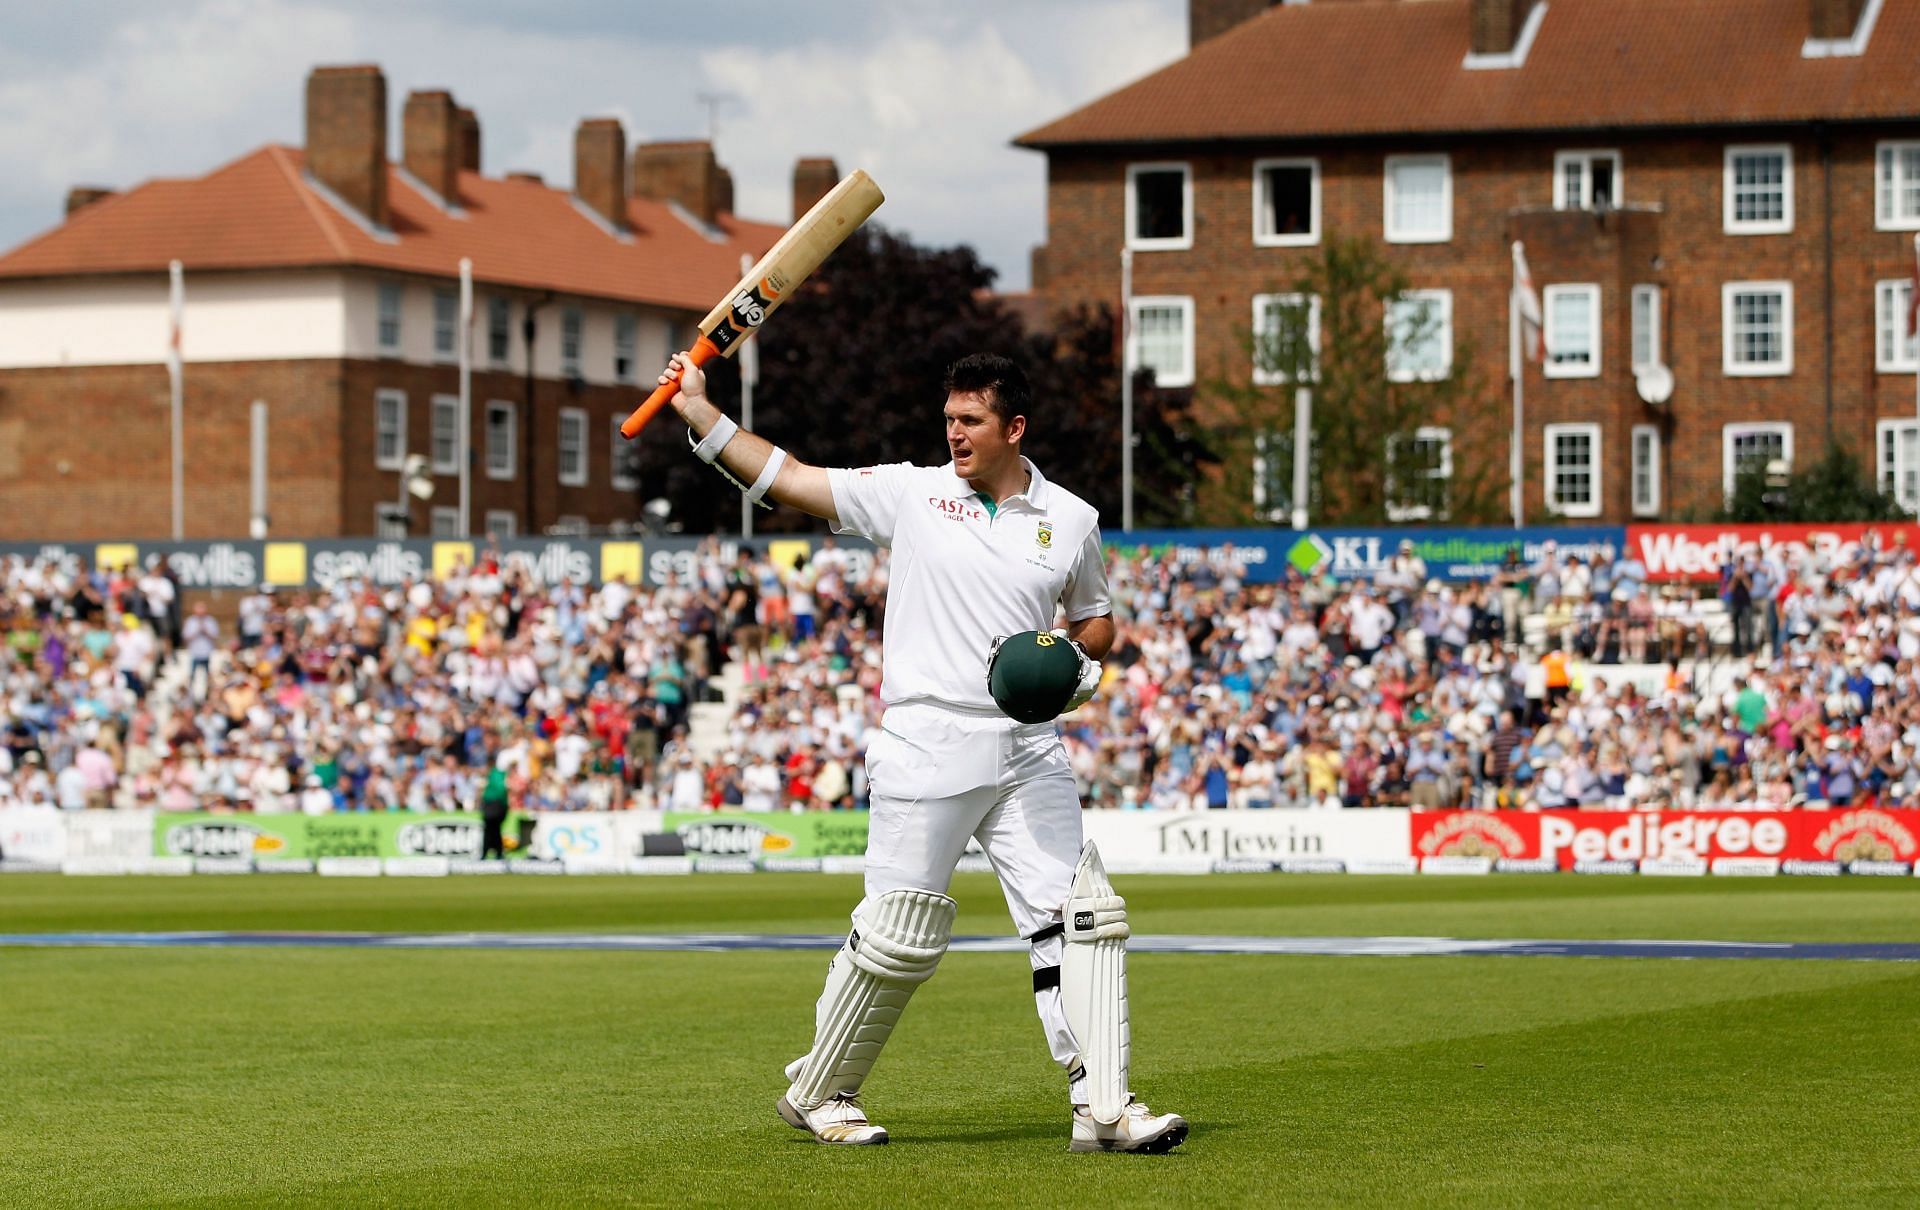 Graeme Smith after being dismissed following his hundred at The Oval in 2012. Pic: Getty Images